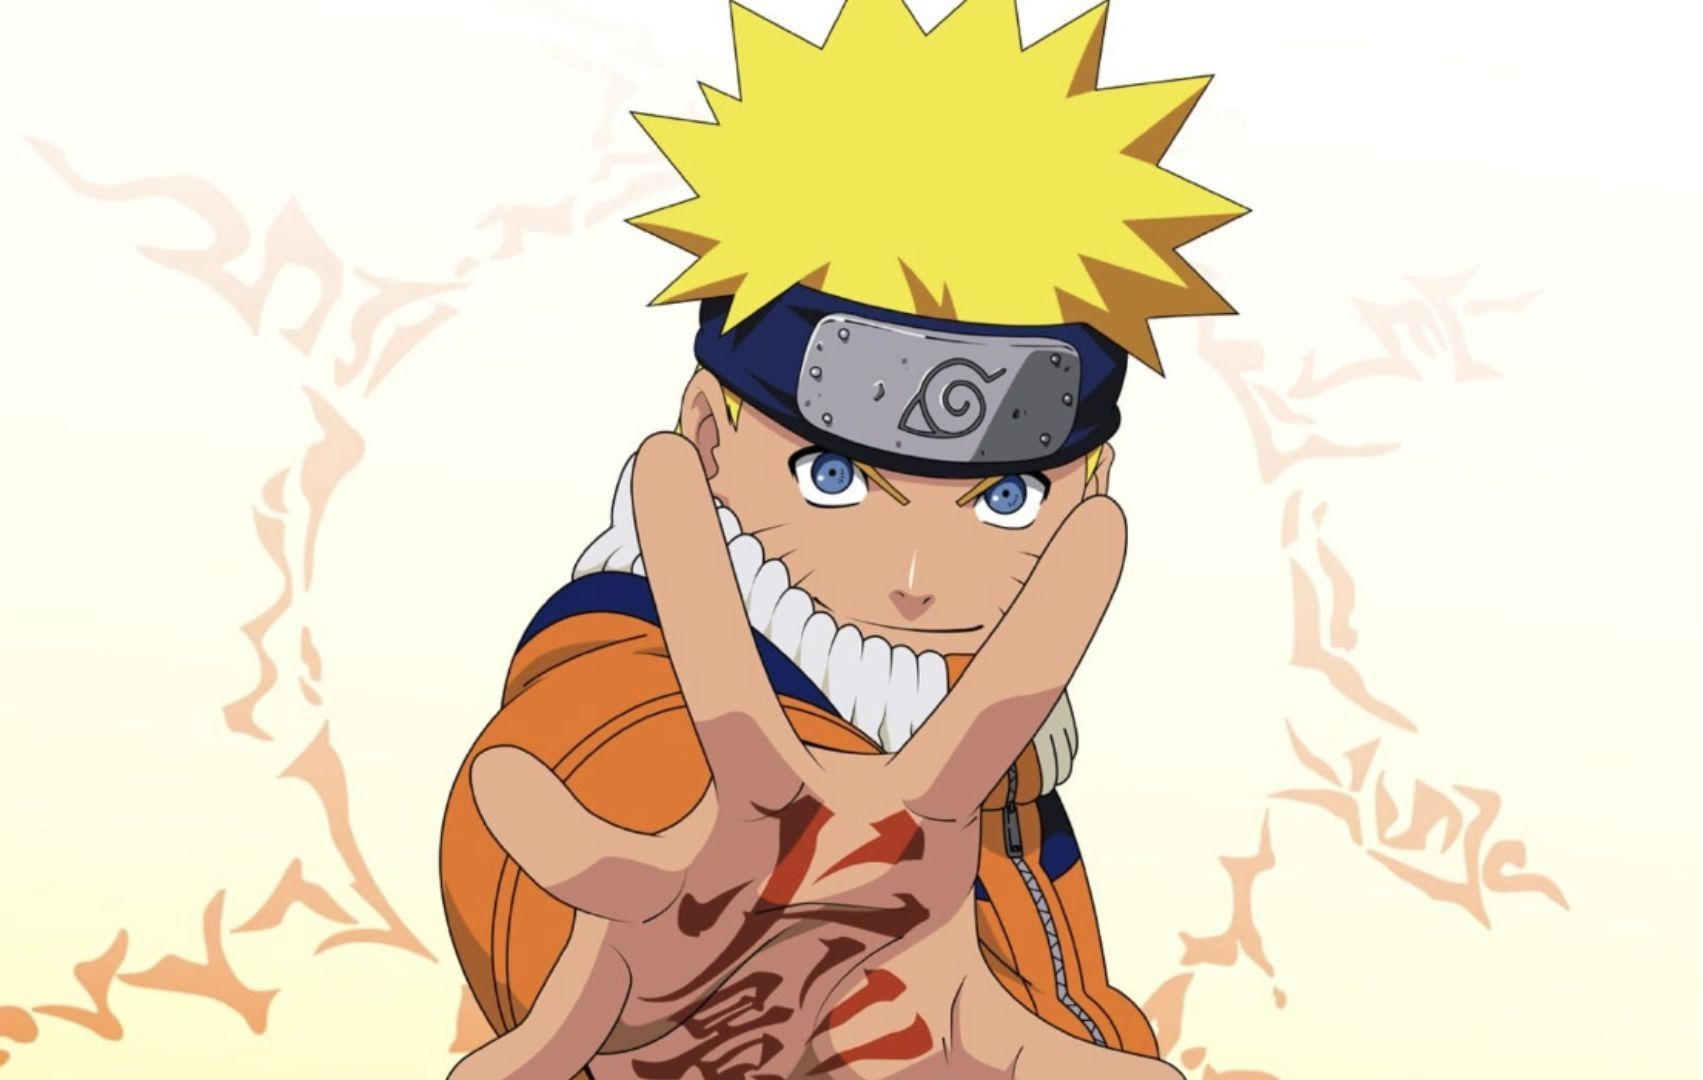 Live-action 'Naruto' film in development with 'Shang-Chi' director